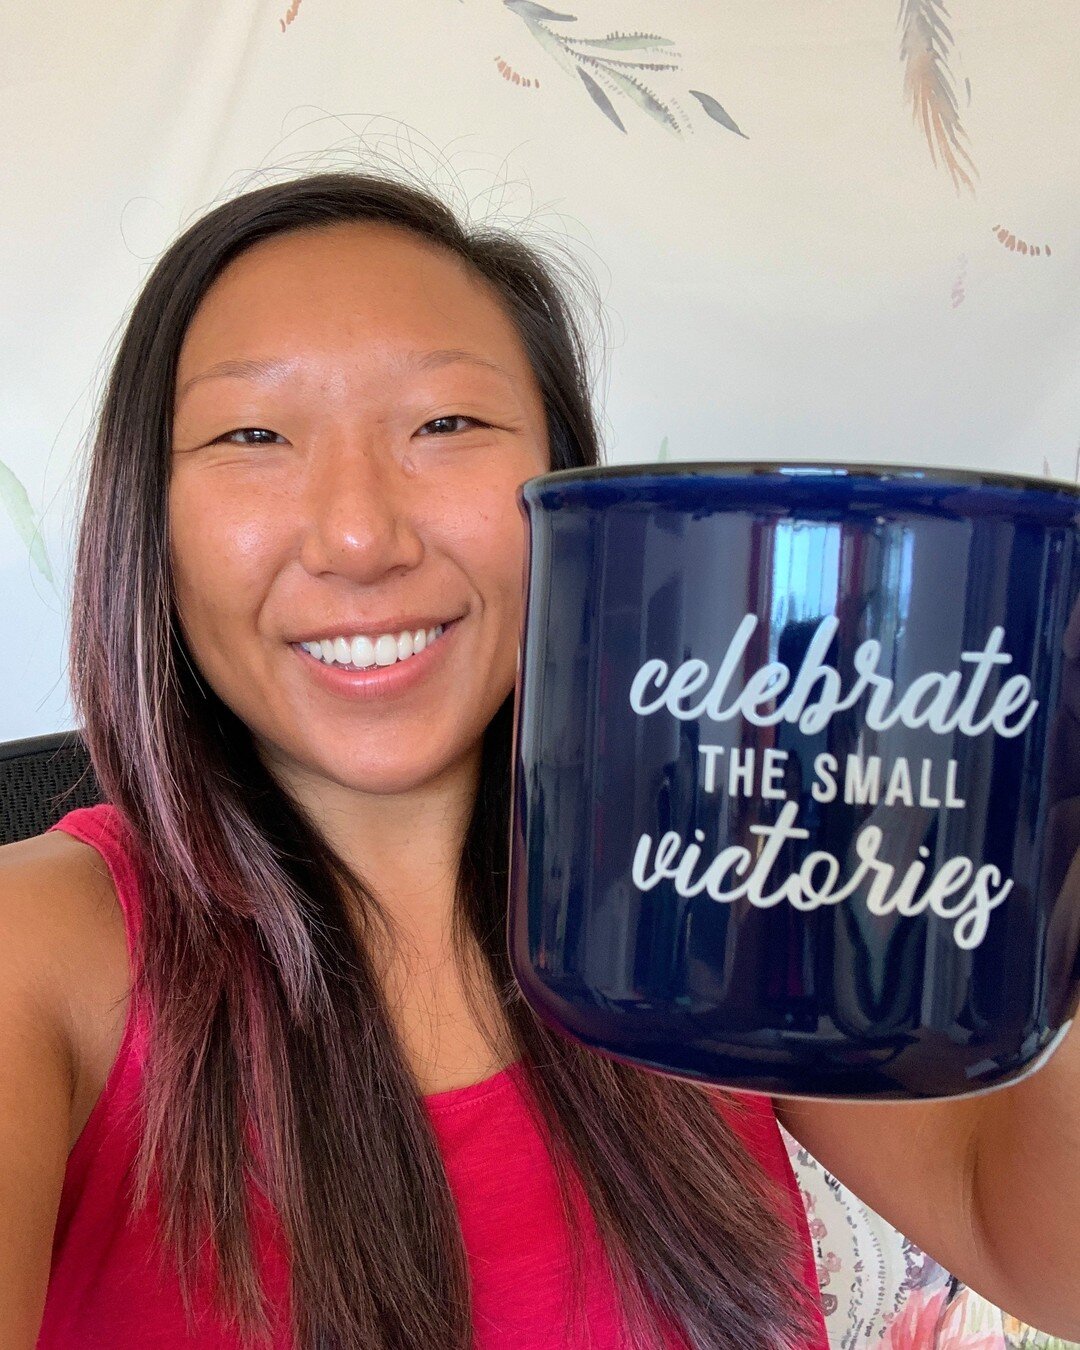 Celebrating you for crossing one thing off your to-do list.
Celebrating you for writing one paragraph of your book.
Celebrating you for sending out that email.
Celebrating you for making one new connection.

It's the little actions that create habits